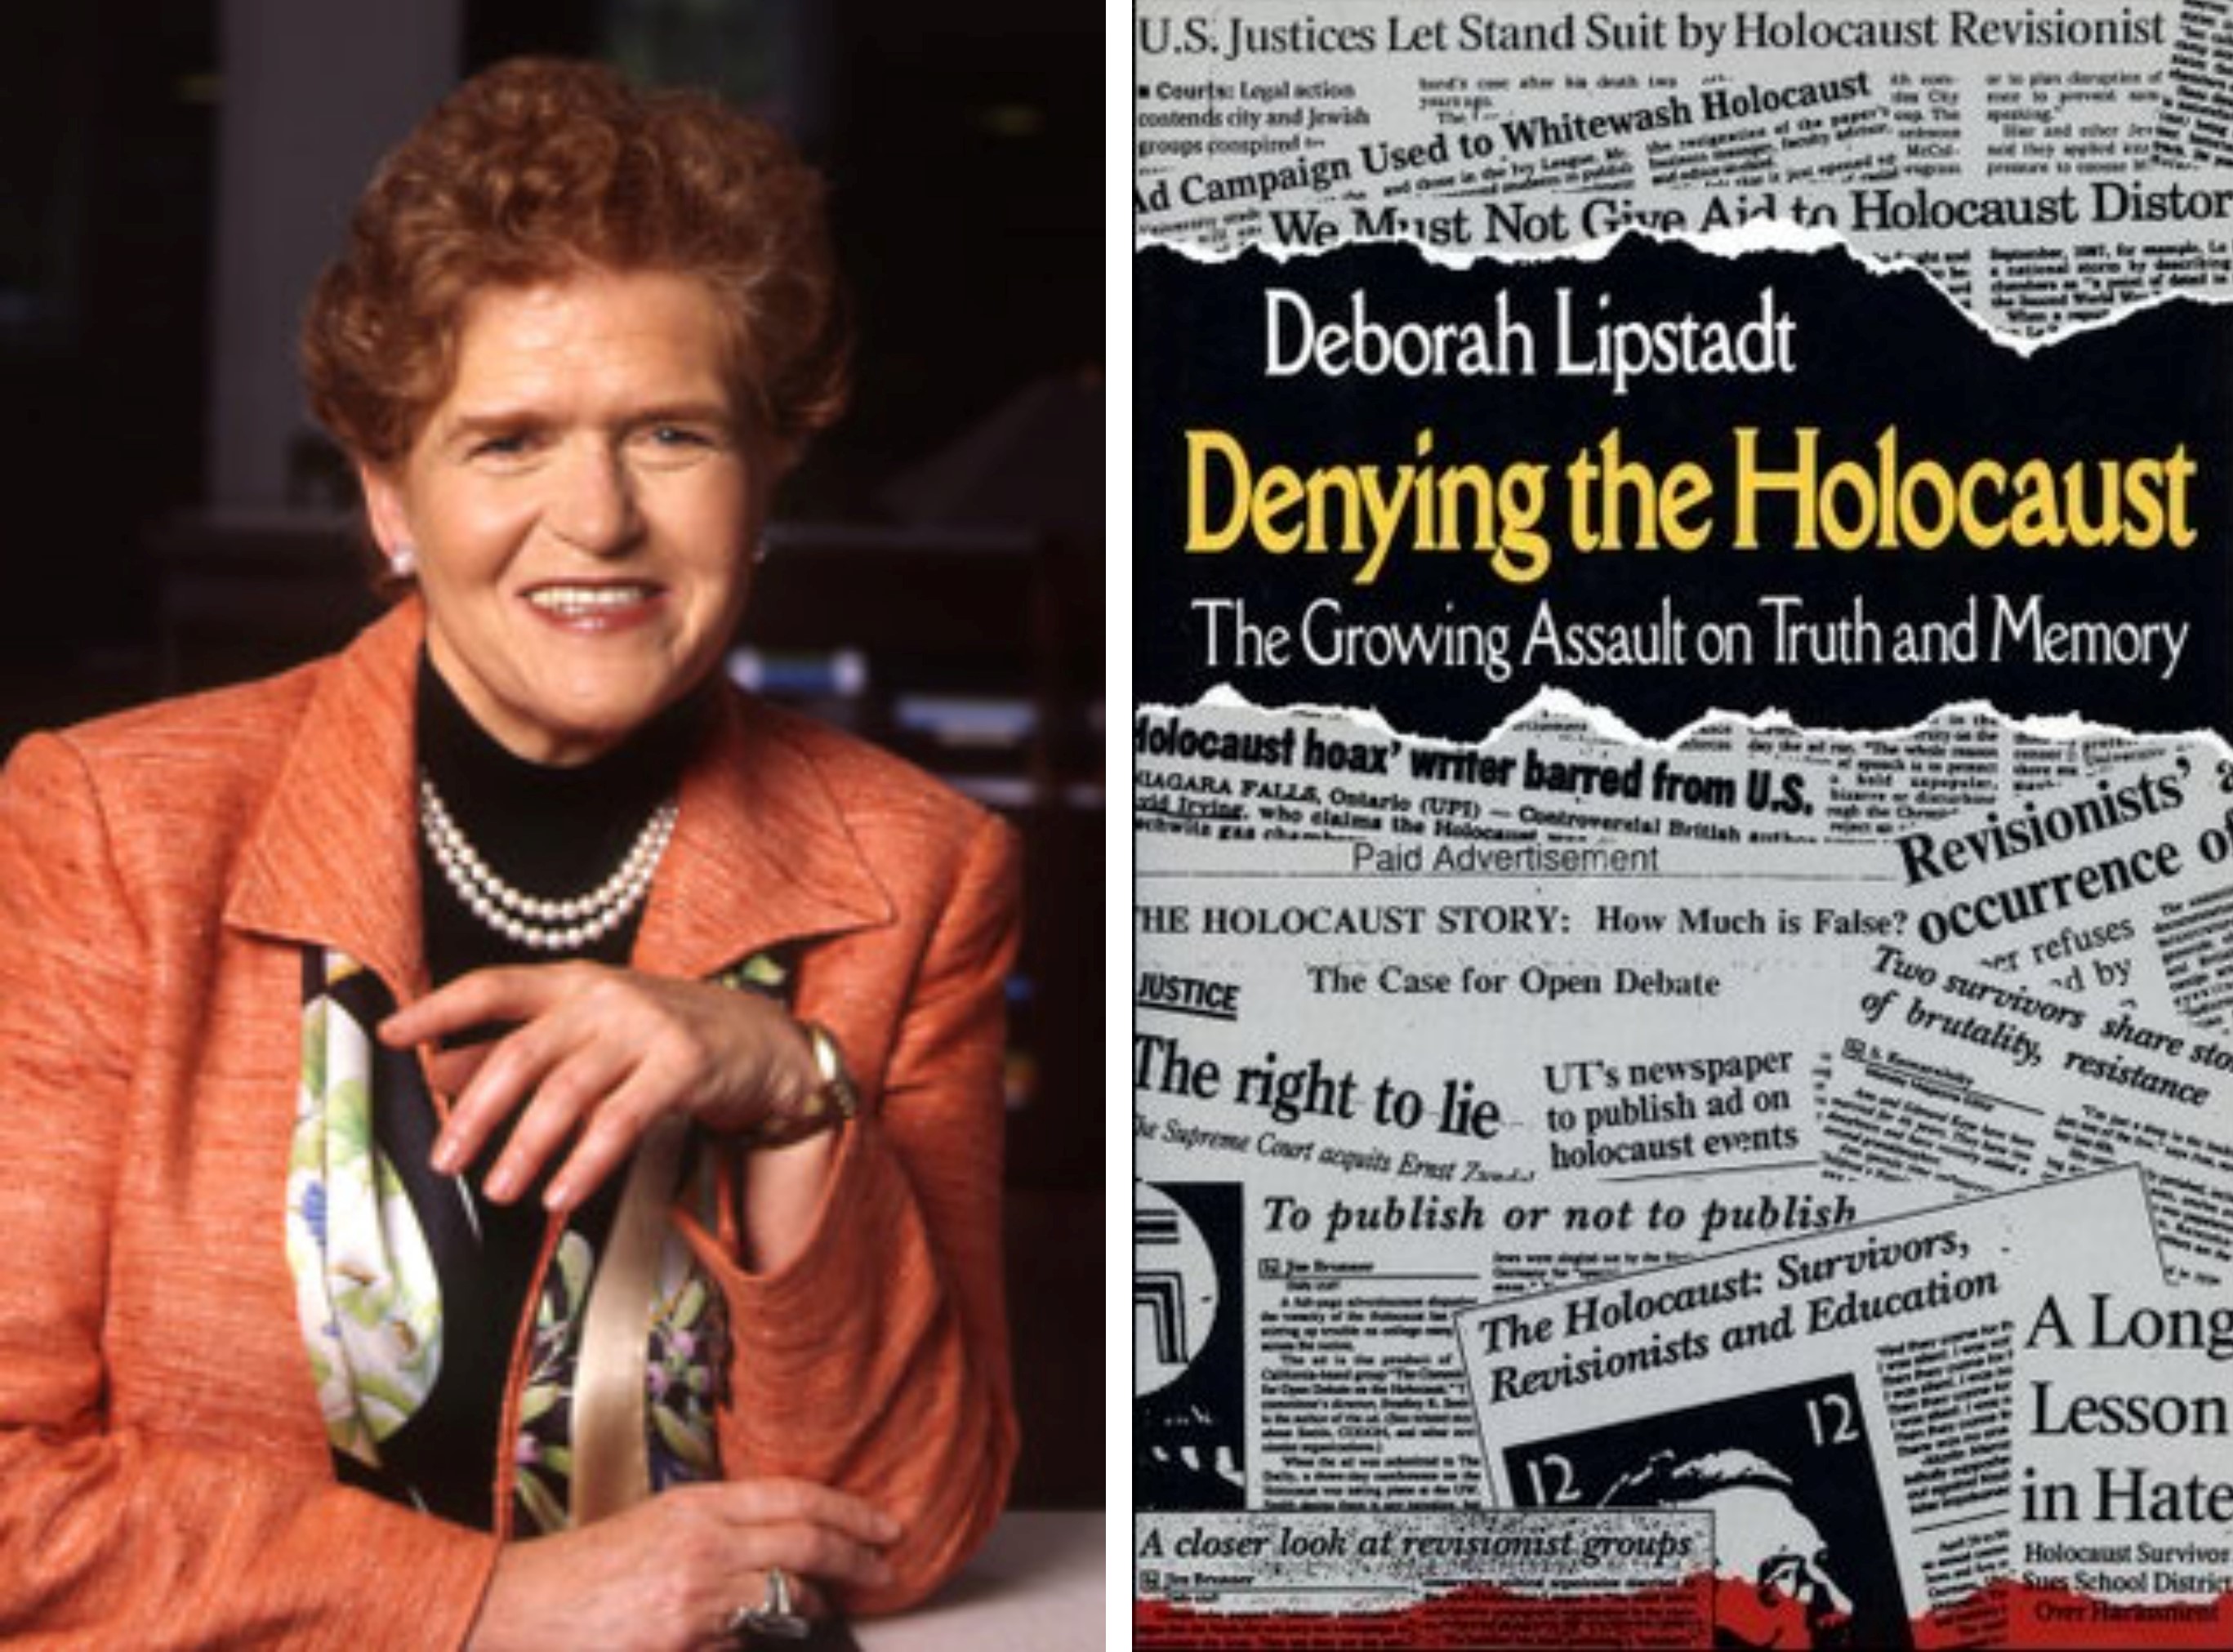 On the left, Deborah Lipstadt. On the right, the cover of 'Denying the Holocaust: The Growing Assault on Truth and Memory.'